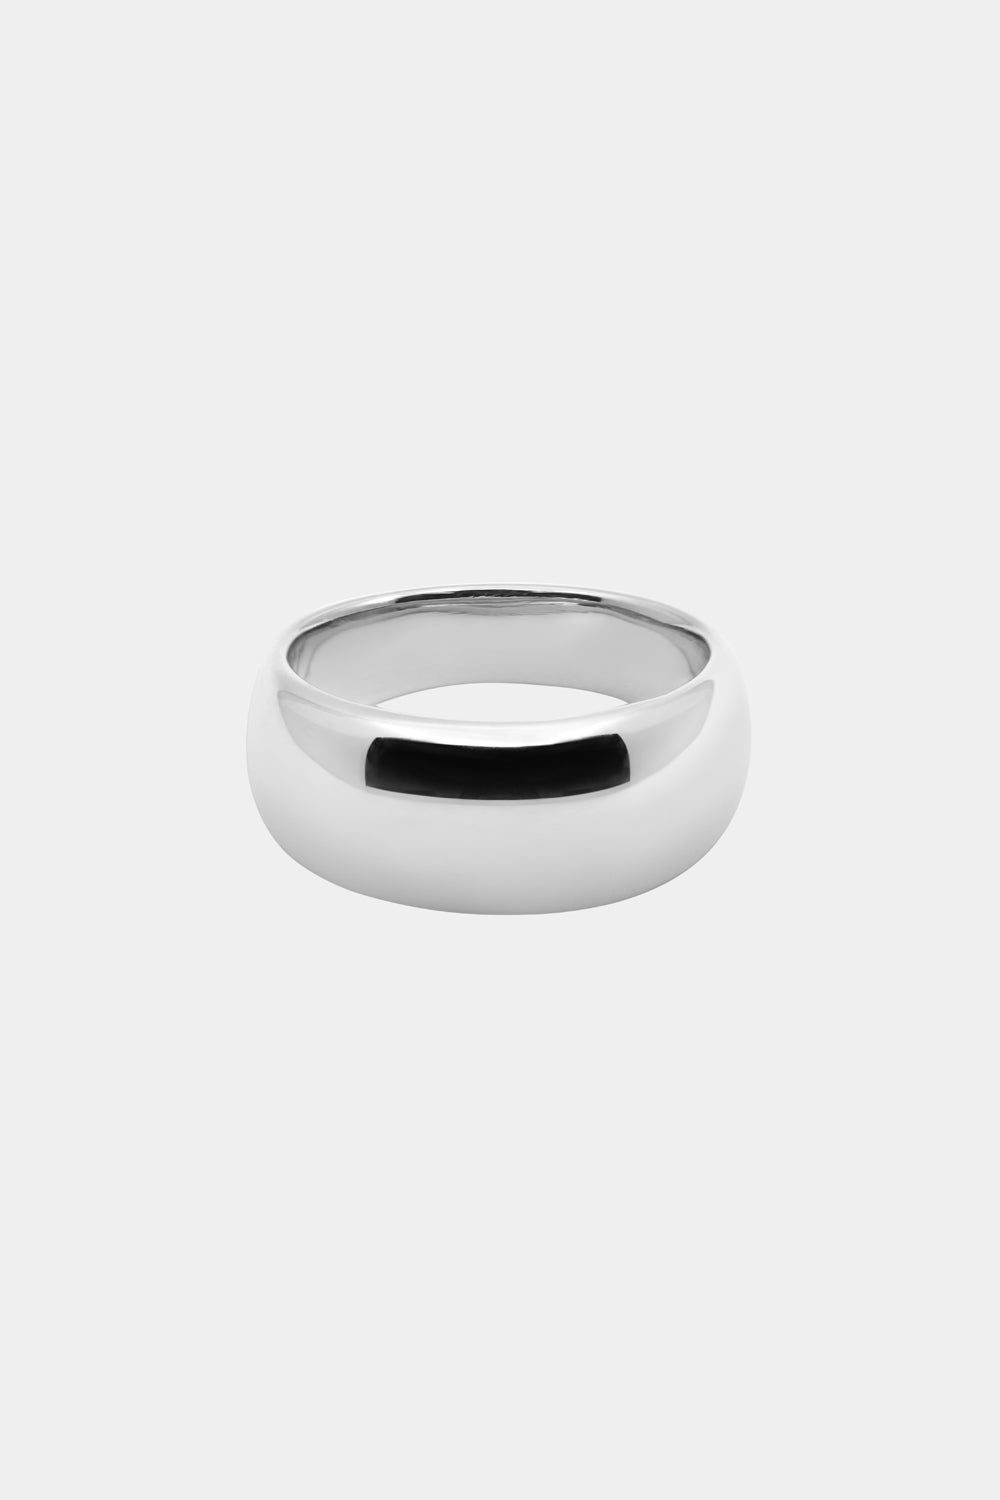 Blob Ring | Silver or White Gold, More options available